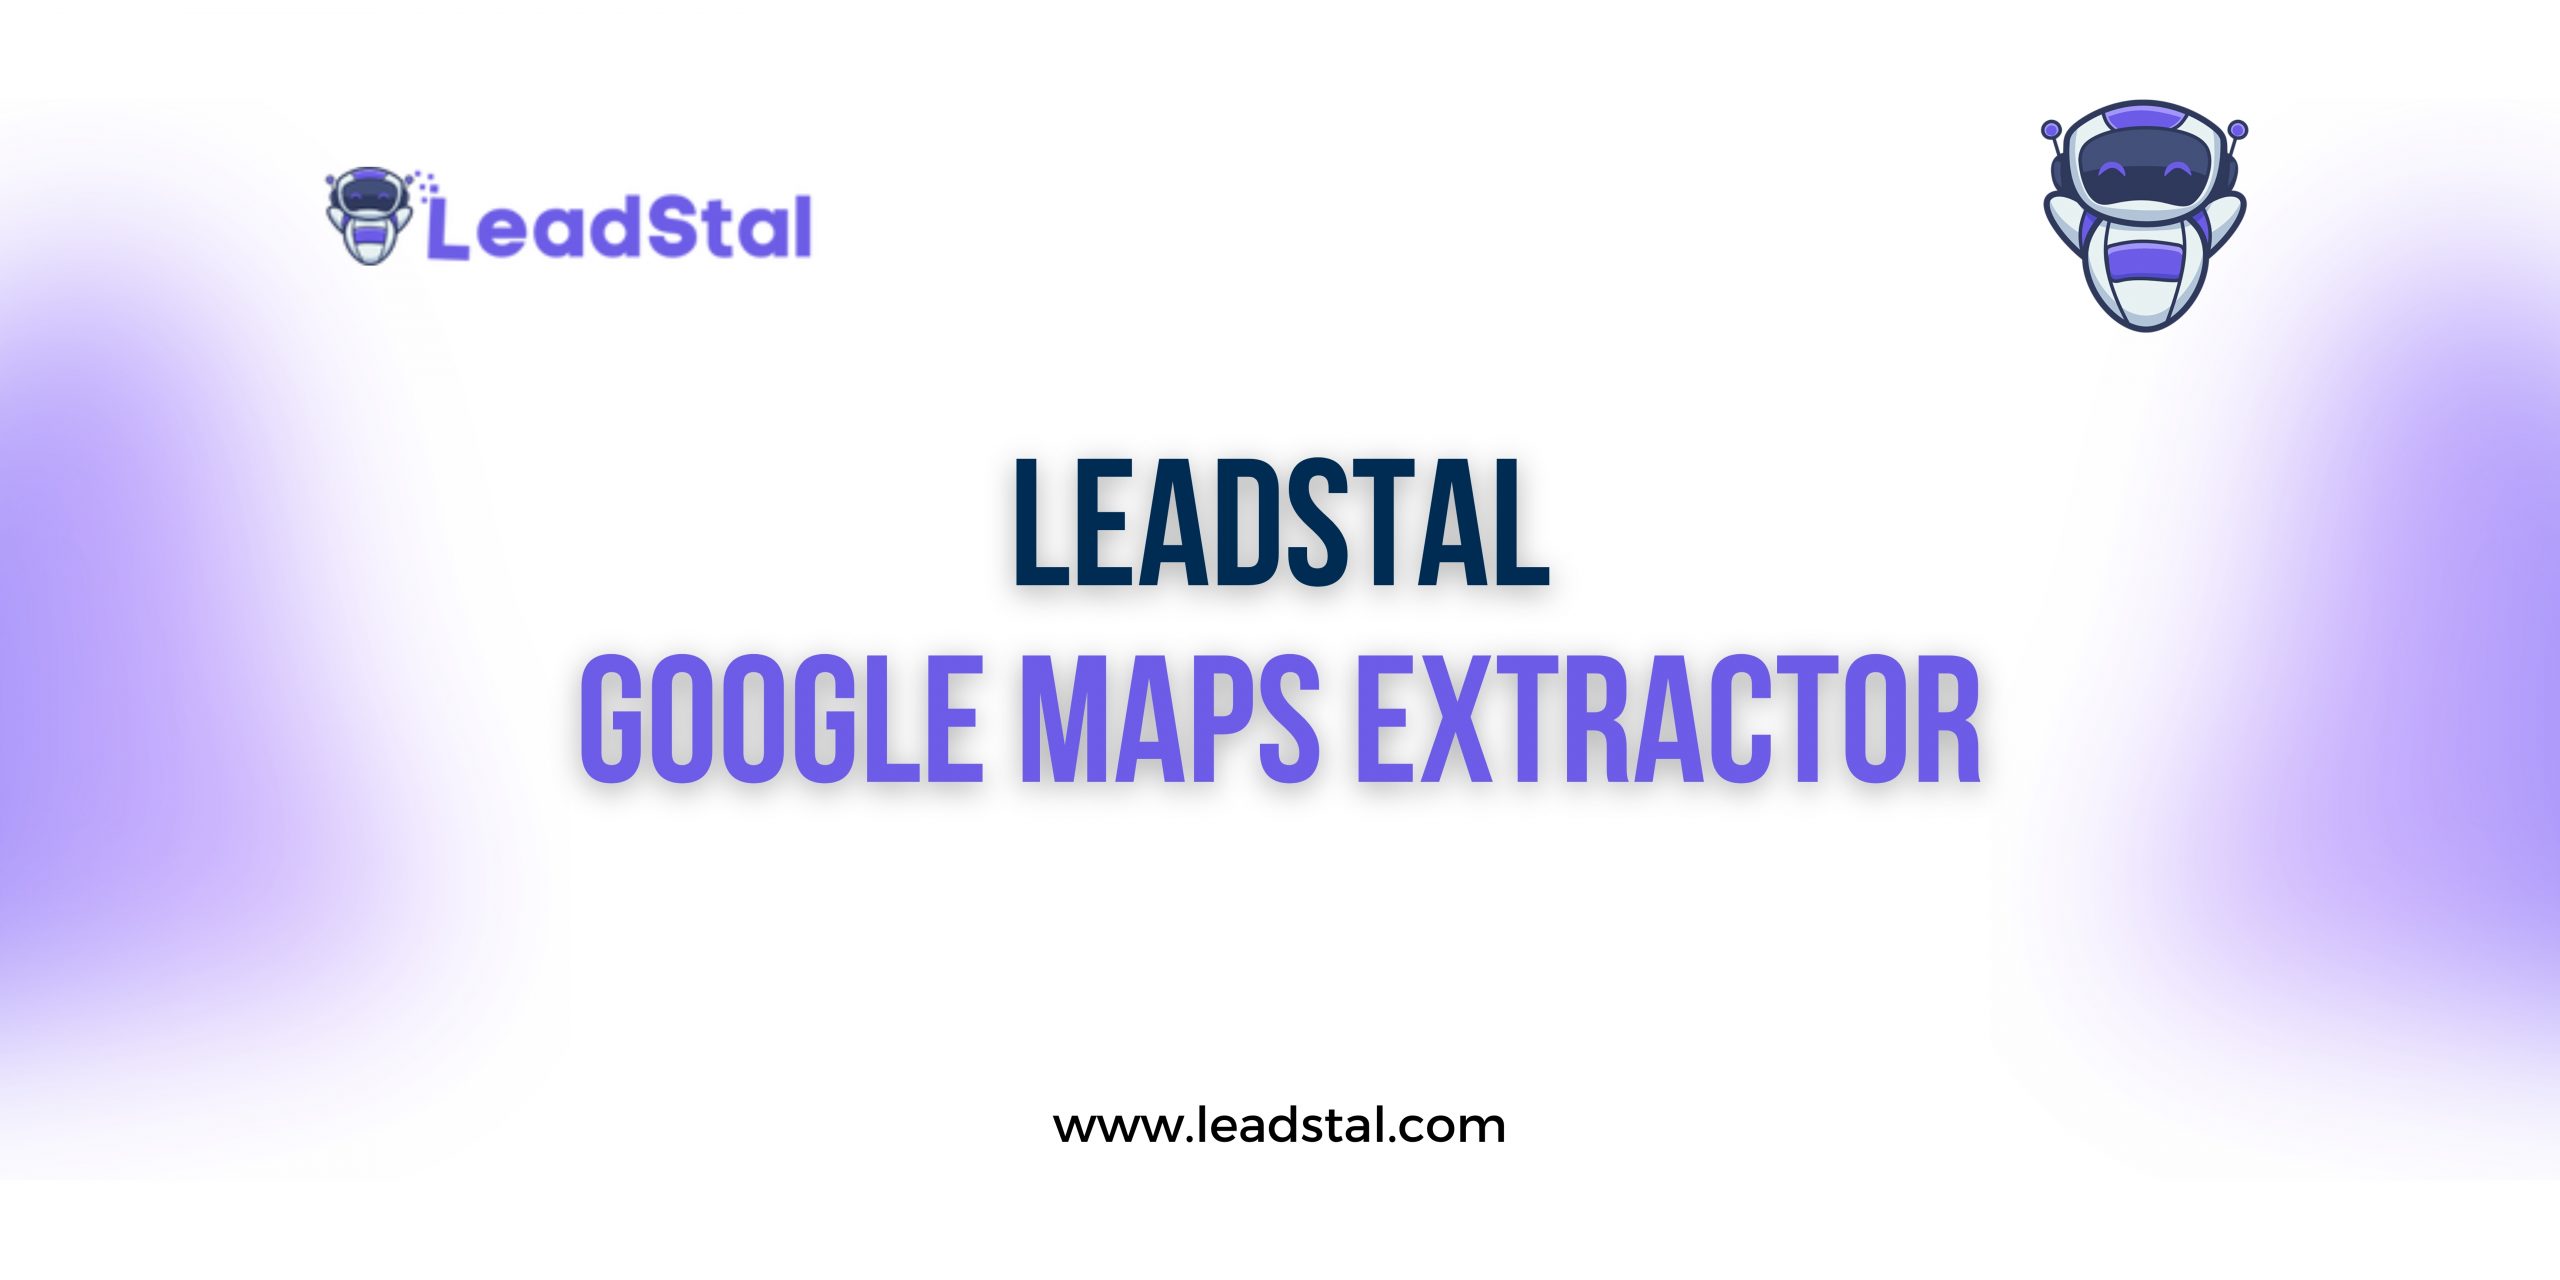 LeadStal Google Maps Extractor